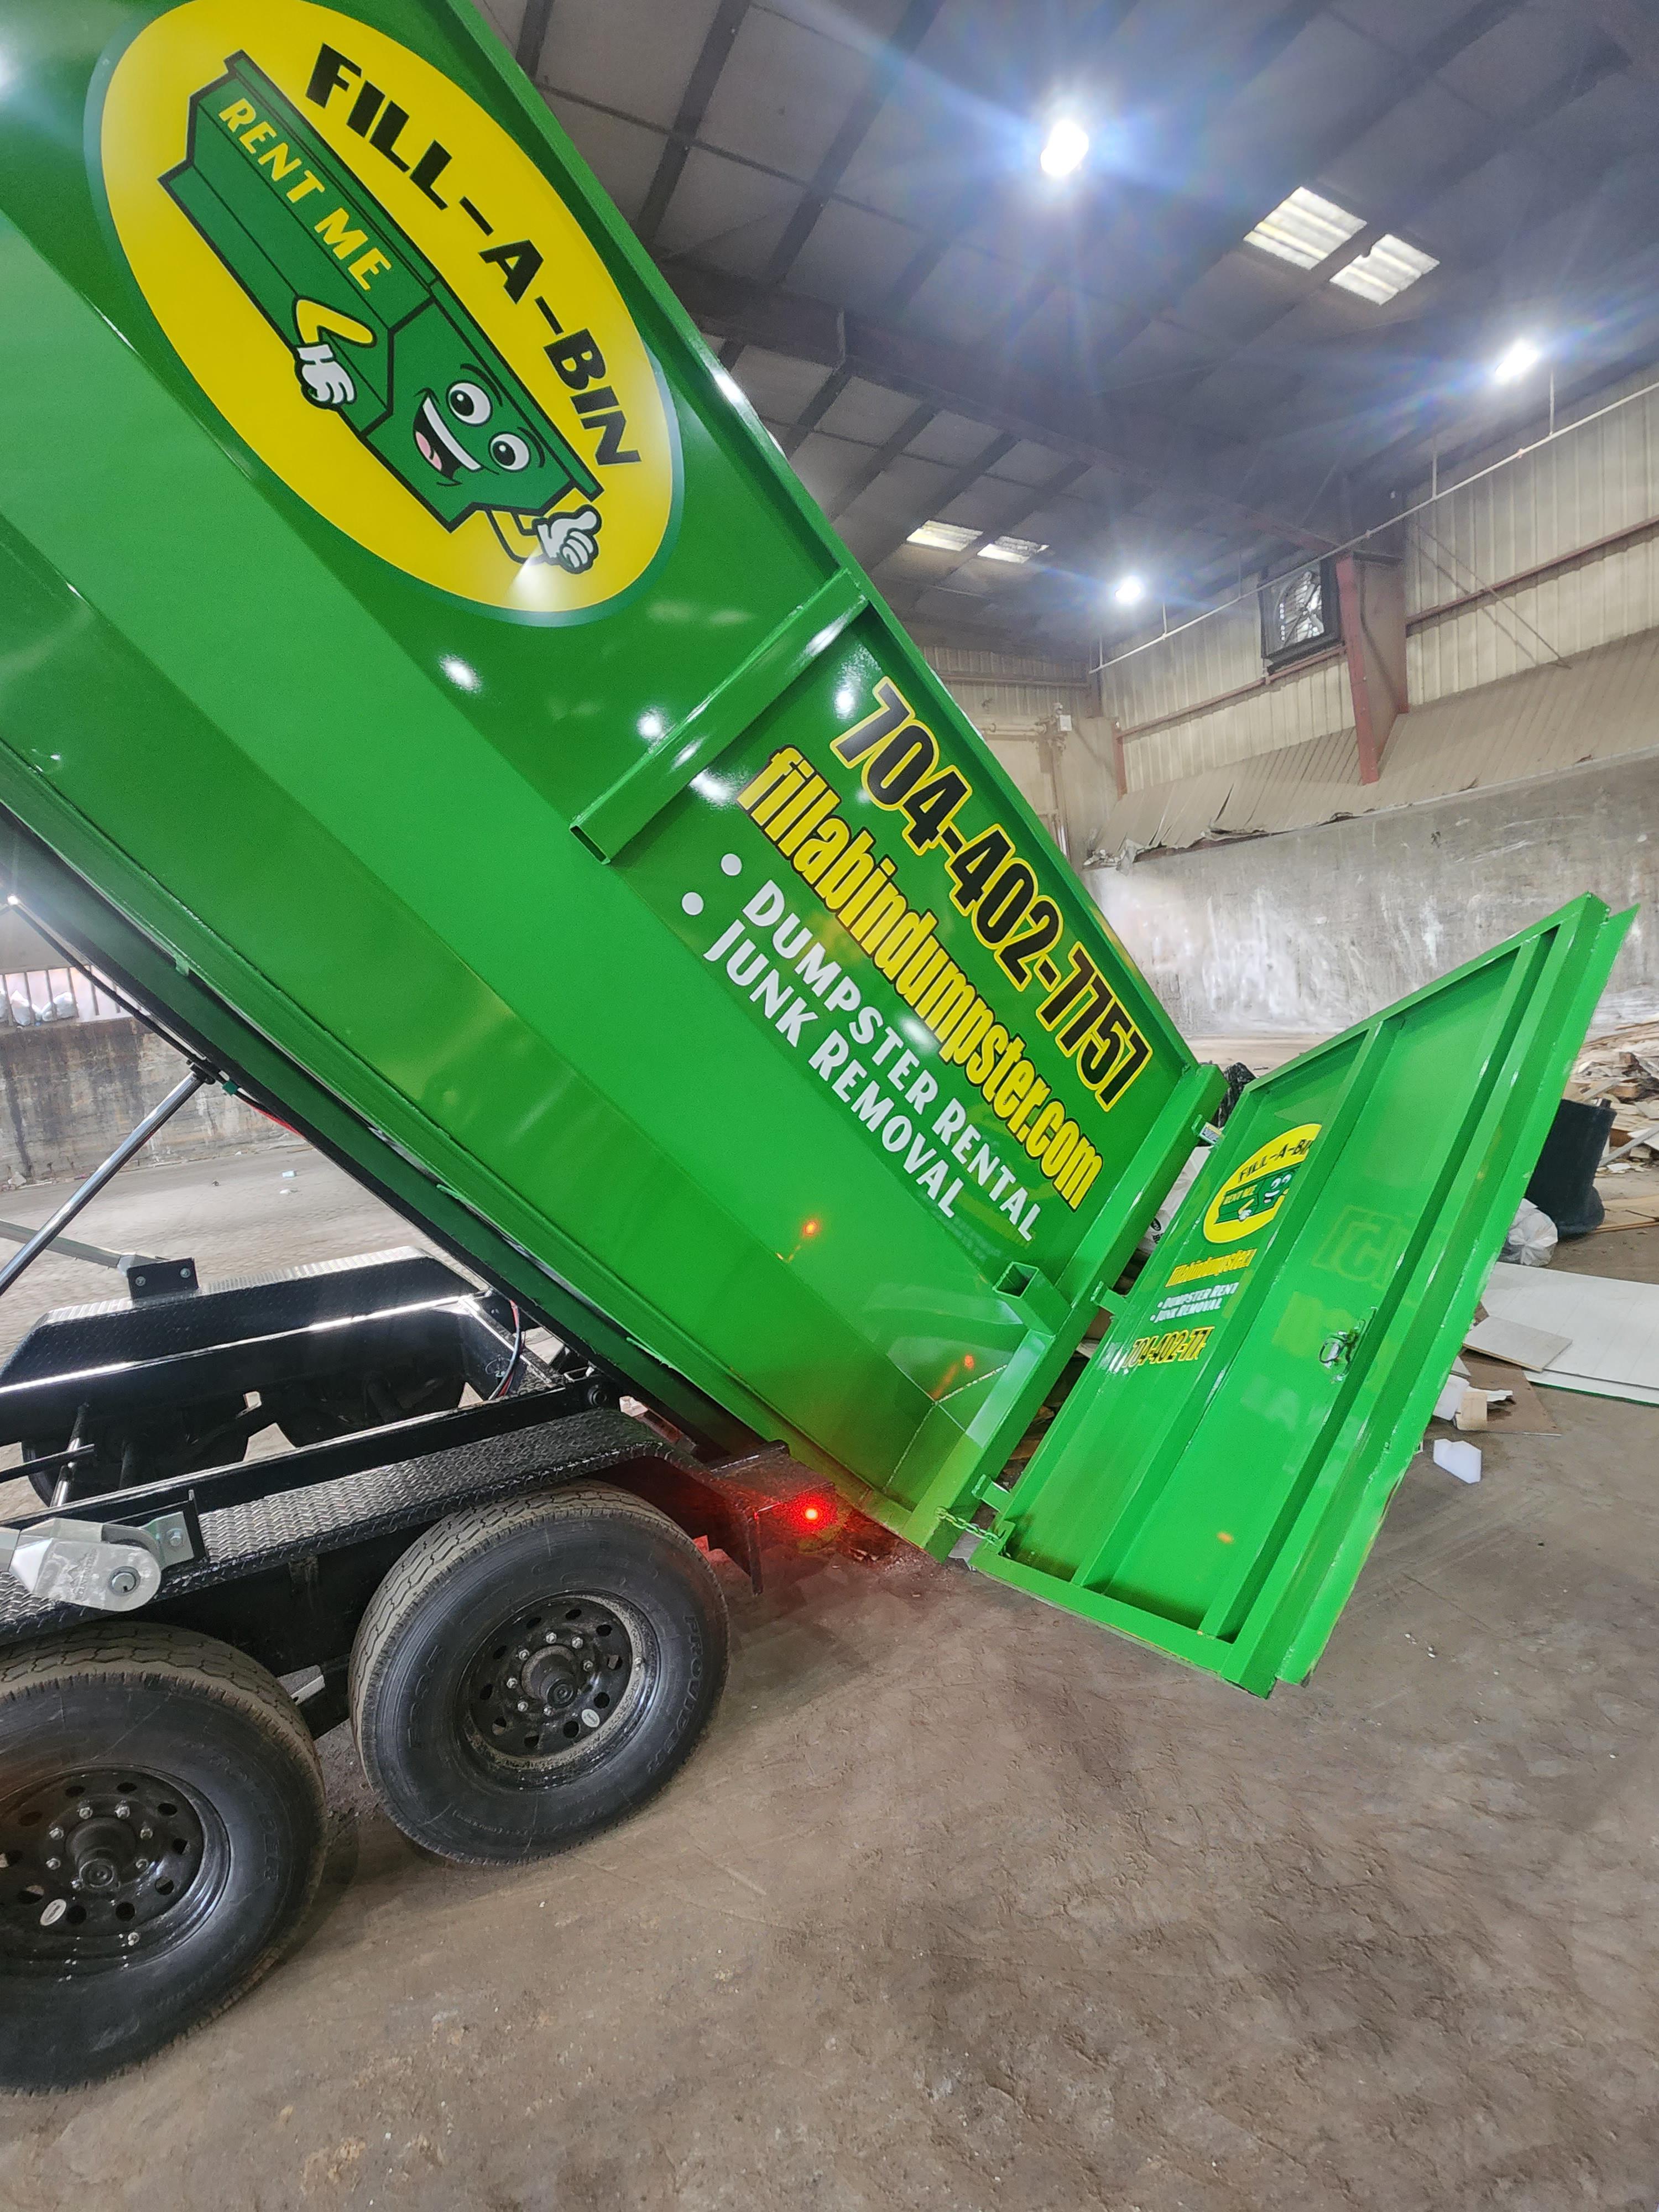 Simplify your waste removal with our local dumpster removal services. Fill-A-Bin Dumpster Rental & Junk Removal ensures prompt and hassle-free removal of dumpsters from your residential or commercial property.